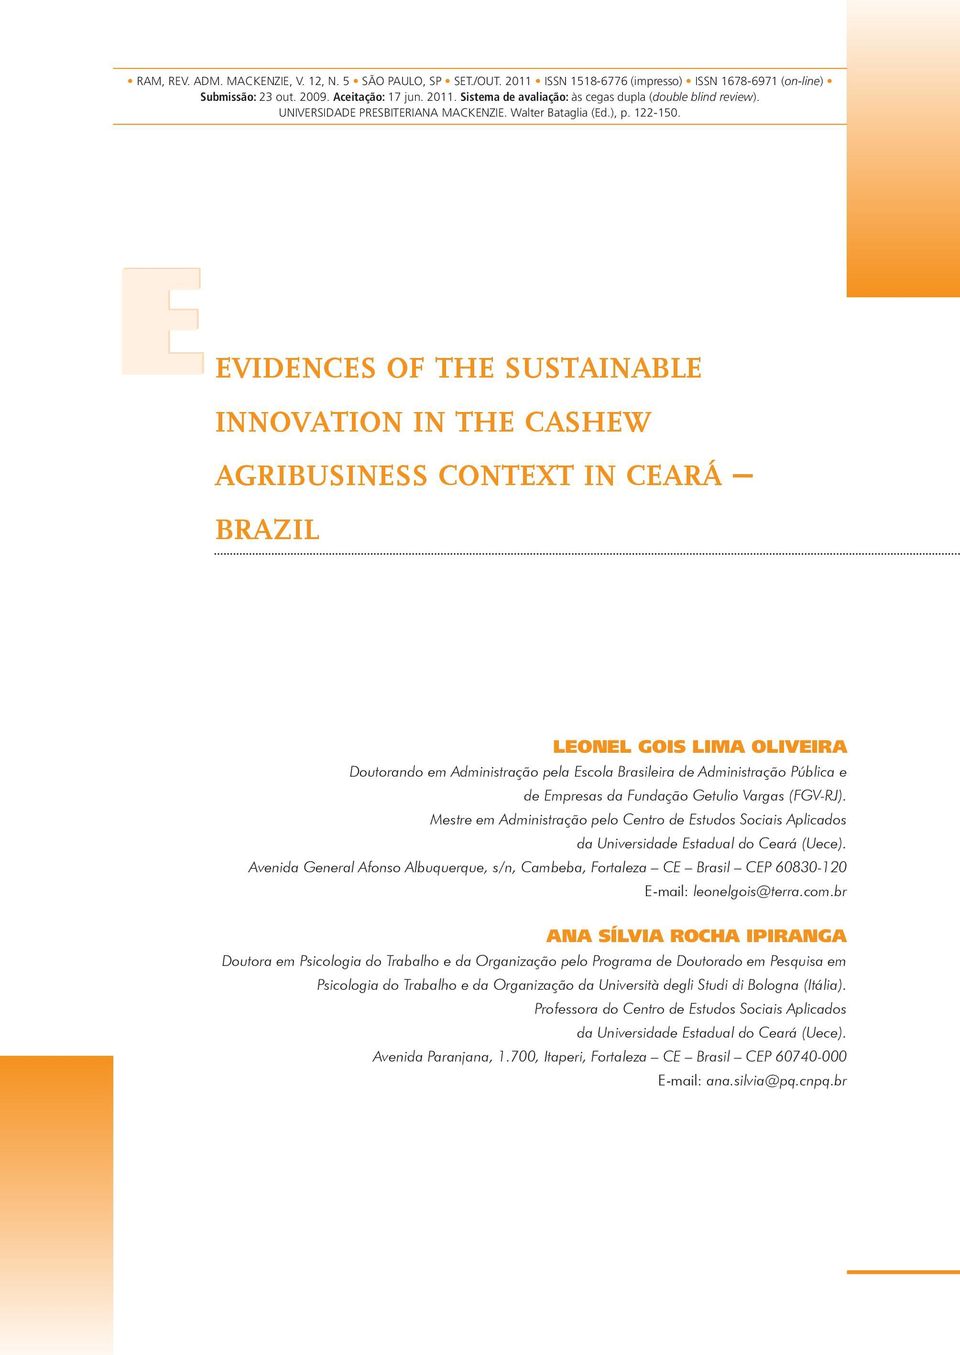 eevidences of the sustainable innovation in the cashew agribusiness context in ceará brazil LEONEL GOIS LIMA OLIVEIRA Doutorando em Administração pela Escola Brasileira de Administração Pública e de